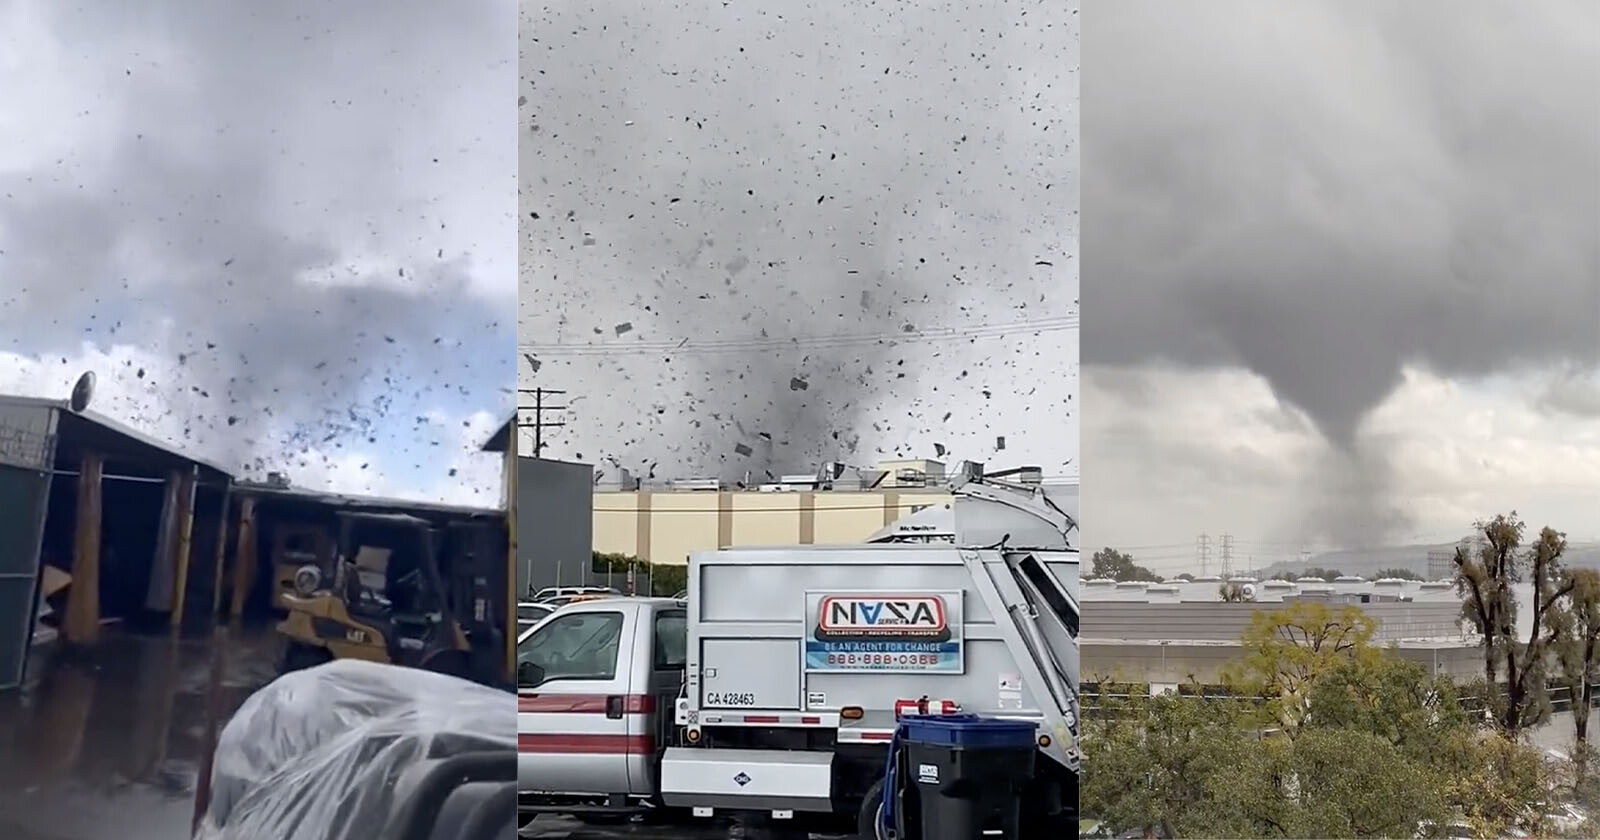 Video of Tornado in Los Angeles Shows Extremely Rare Weather Phenomenon